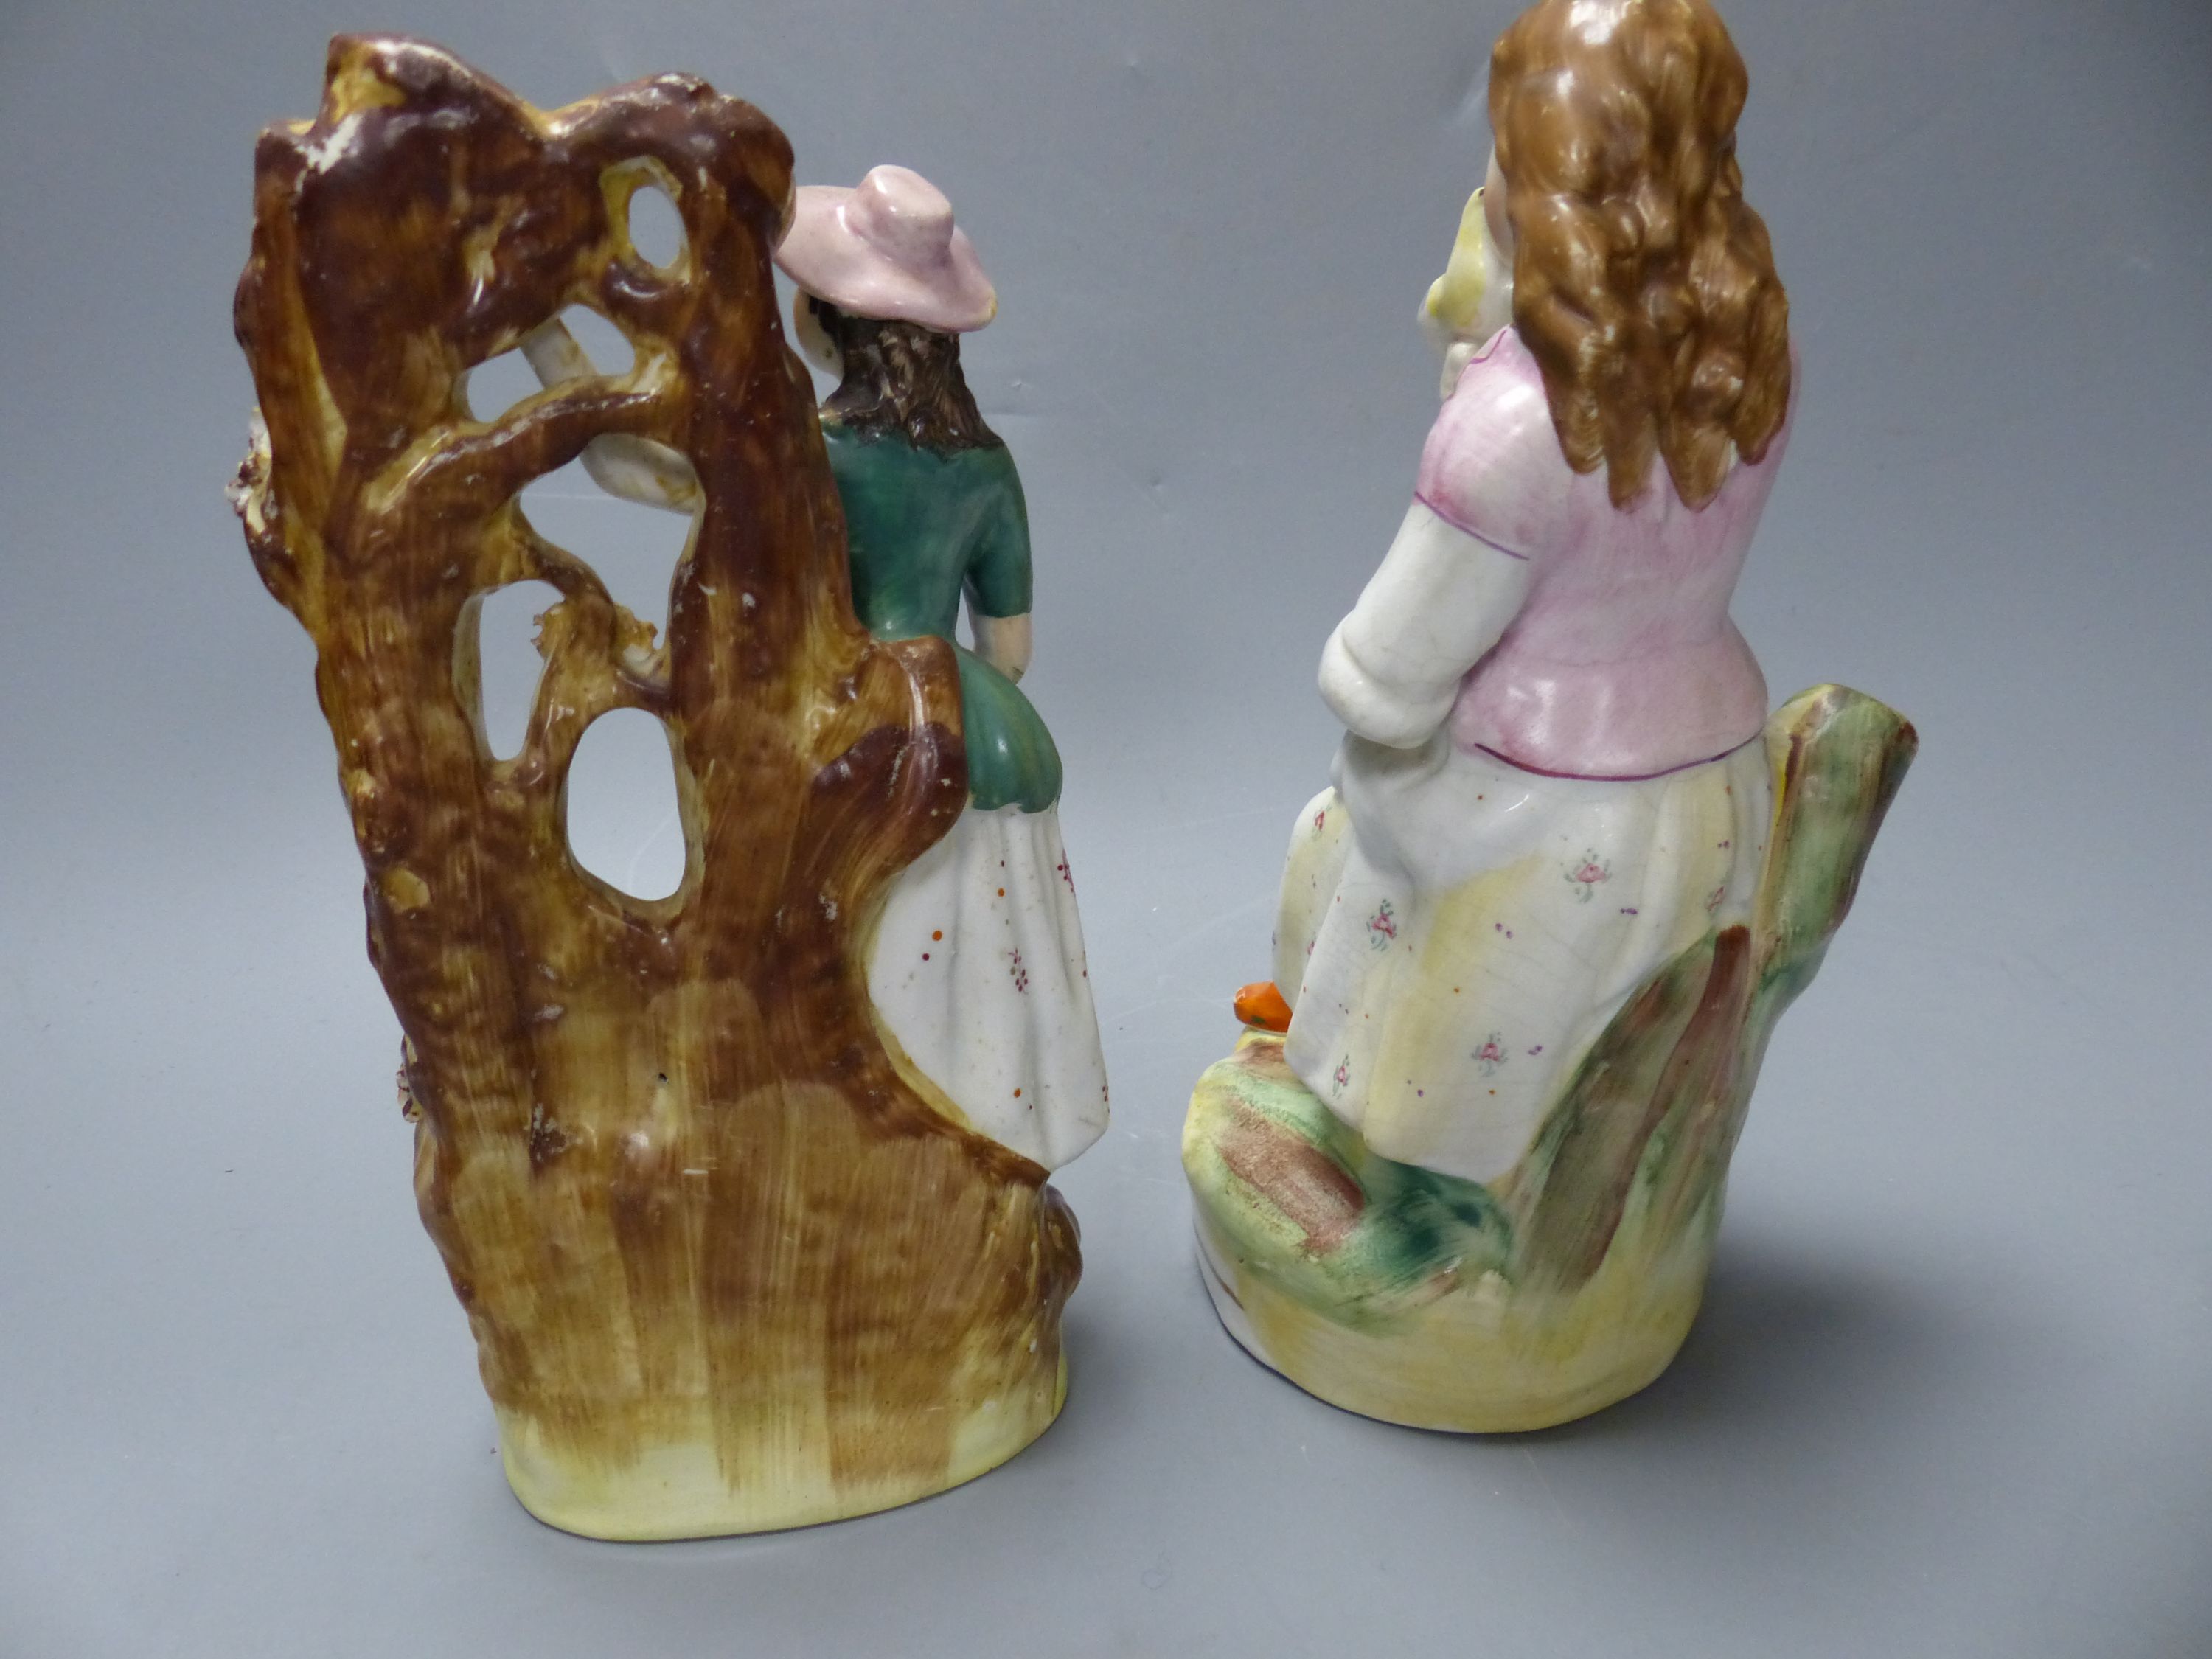 A Staffordshire figure of a female grape picker with vine bocage and three other figures